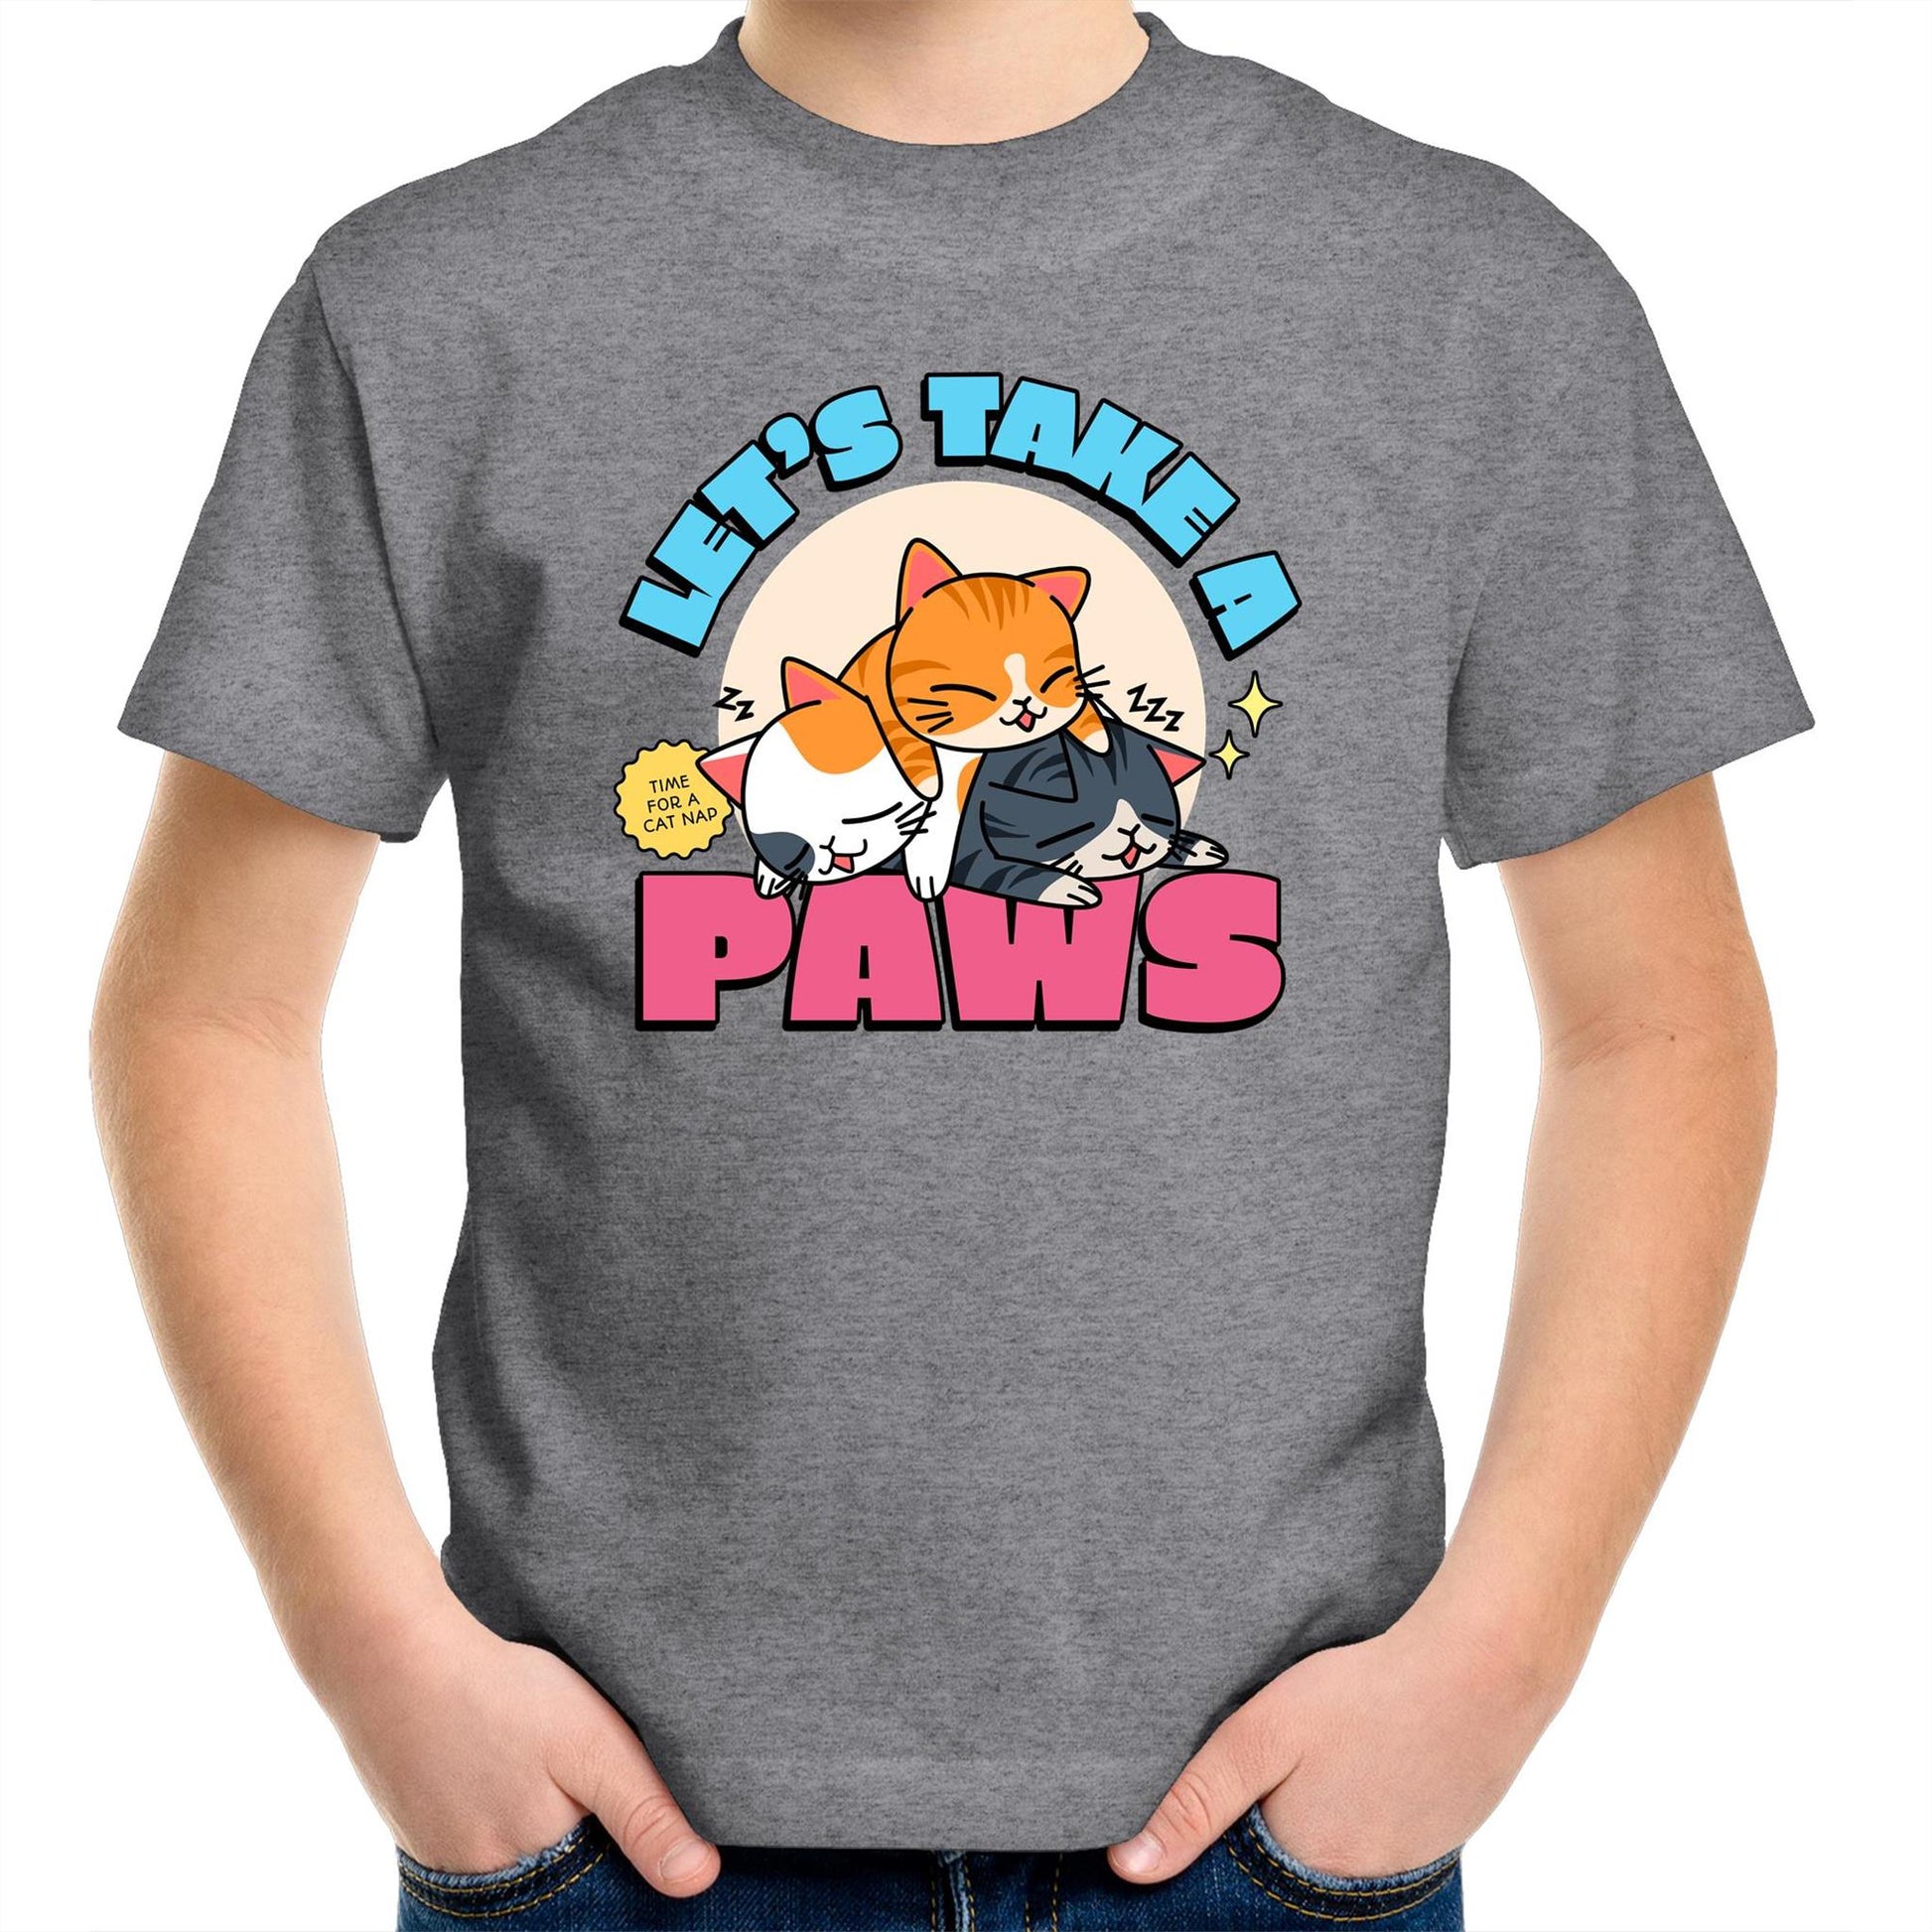 Let's Take A Pause, Time For A Cat Nap - Kids Youth T-Shirt Grey Marle Kids Youth T-shirt animal